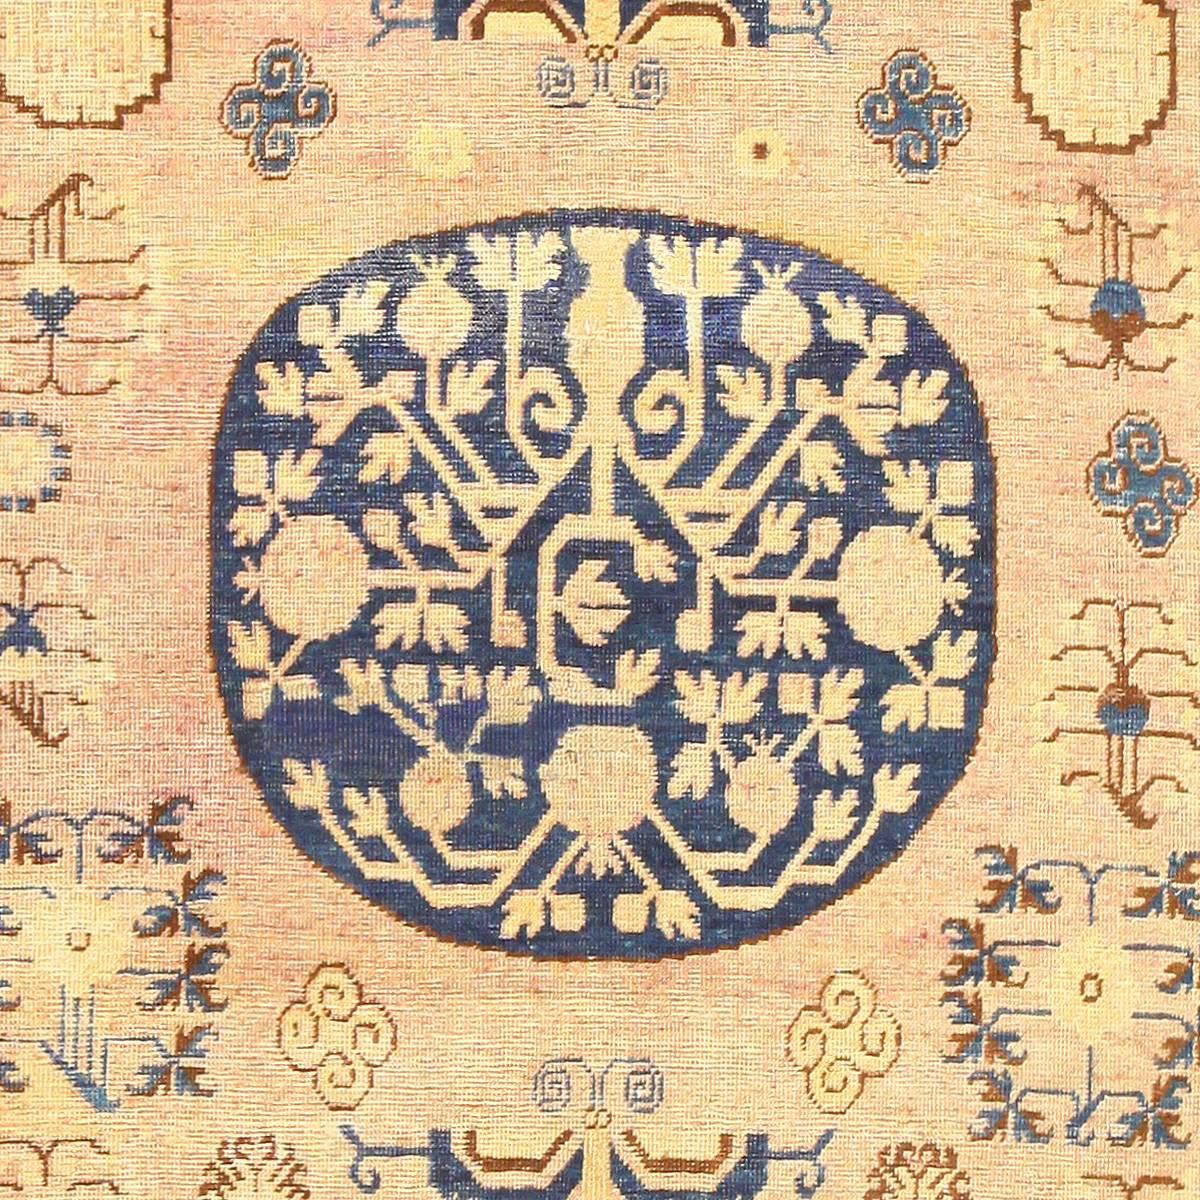 Antique Khotan Rug, Country of Origin / Rug Type: East Turkestan Rugs, Circa Date: Early 20th Century – Size: 6 ft 6 in x 13 ft 2 in (1.98 m x 4.01 m)

Flowing lines define the majority of this Khotan rug’s presence, and the relatively simple color